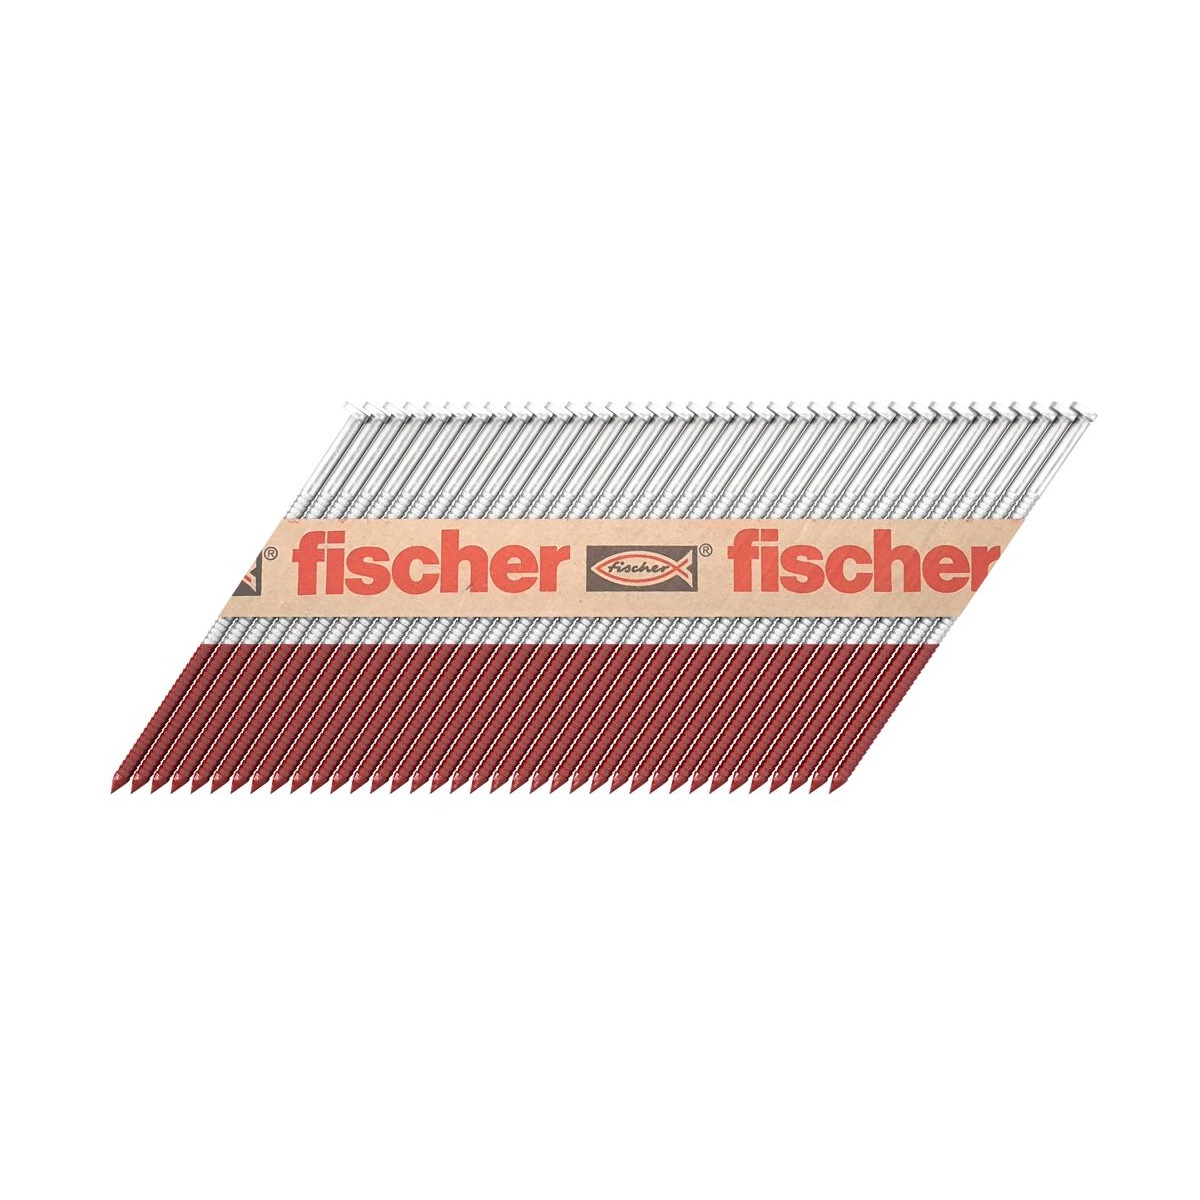 Fischer FF NFP 51x2.8mm Ring Galv 3300 N.G